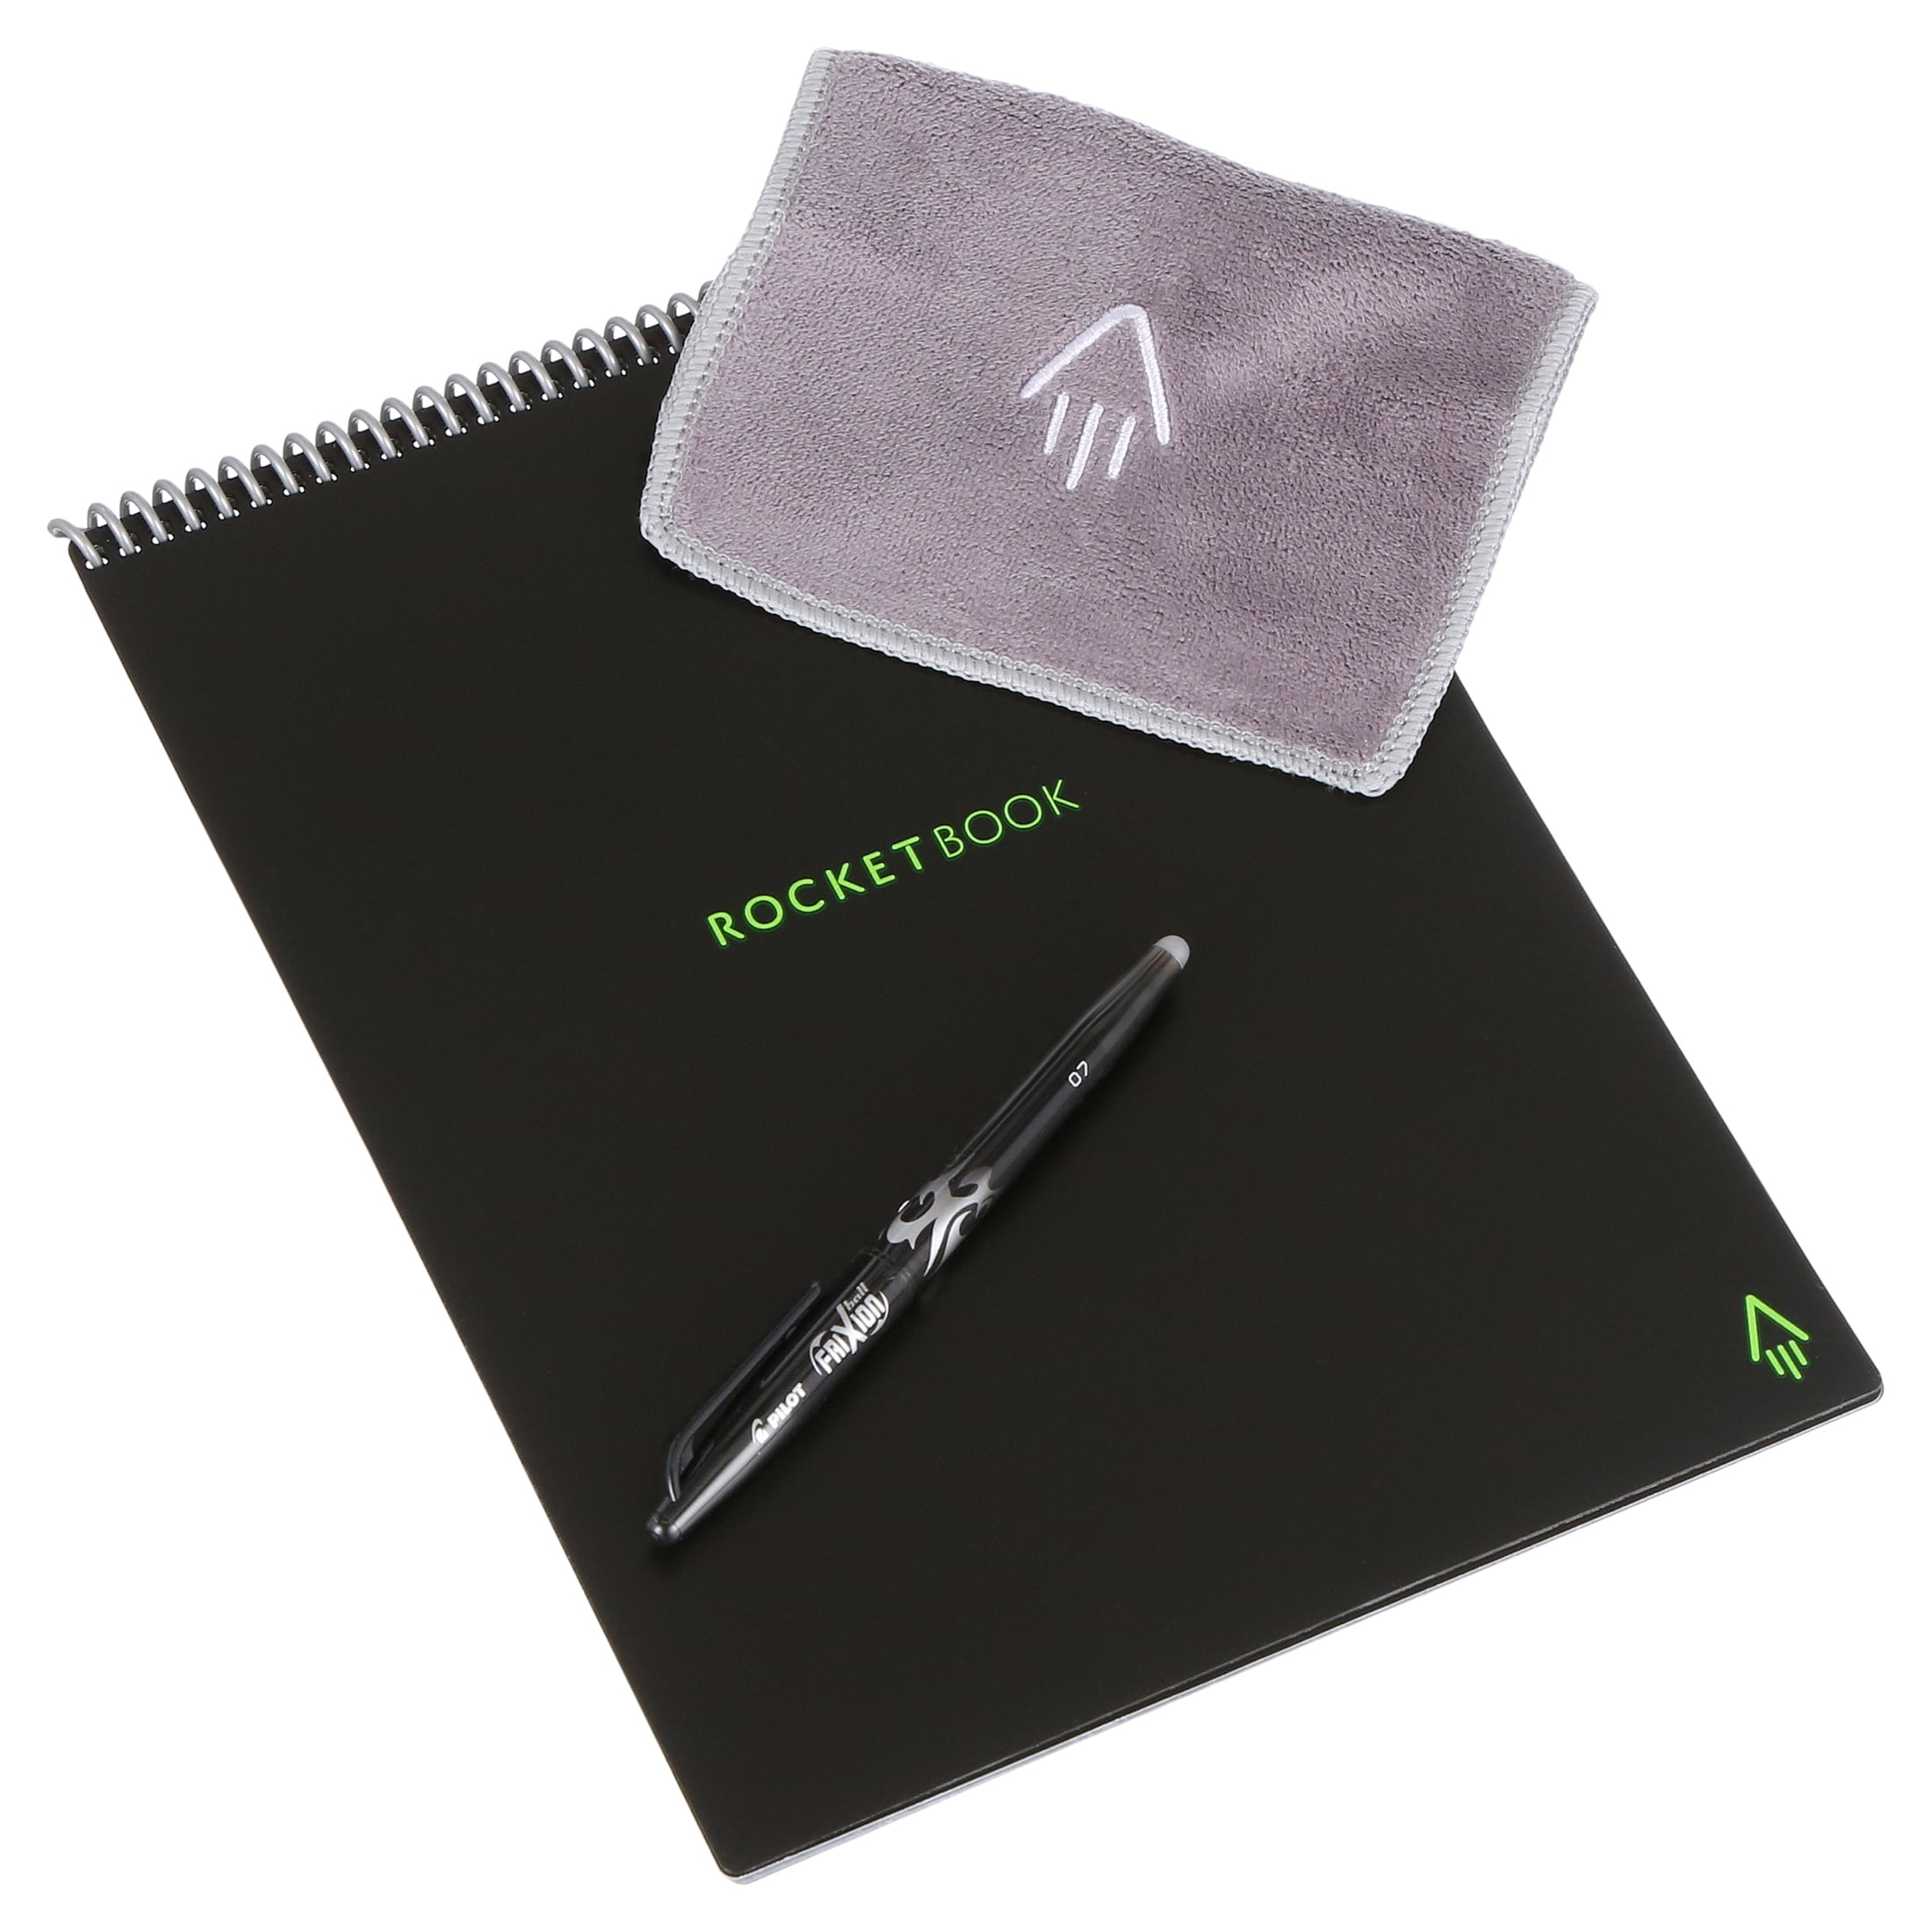  Rocketbook Smart Reusable Notebook - Dotted Grid Eco-Friendly  Notebook with 1 Pilot Frixion Pen & 1 Microfiber Cloth Included - Infinity  Black Cover, Mini Size (3.5 x 5.5) : Office Products